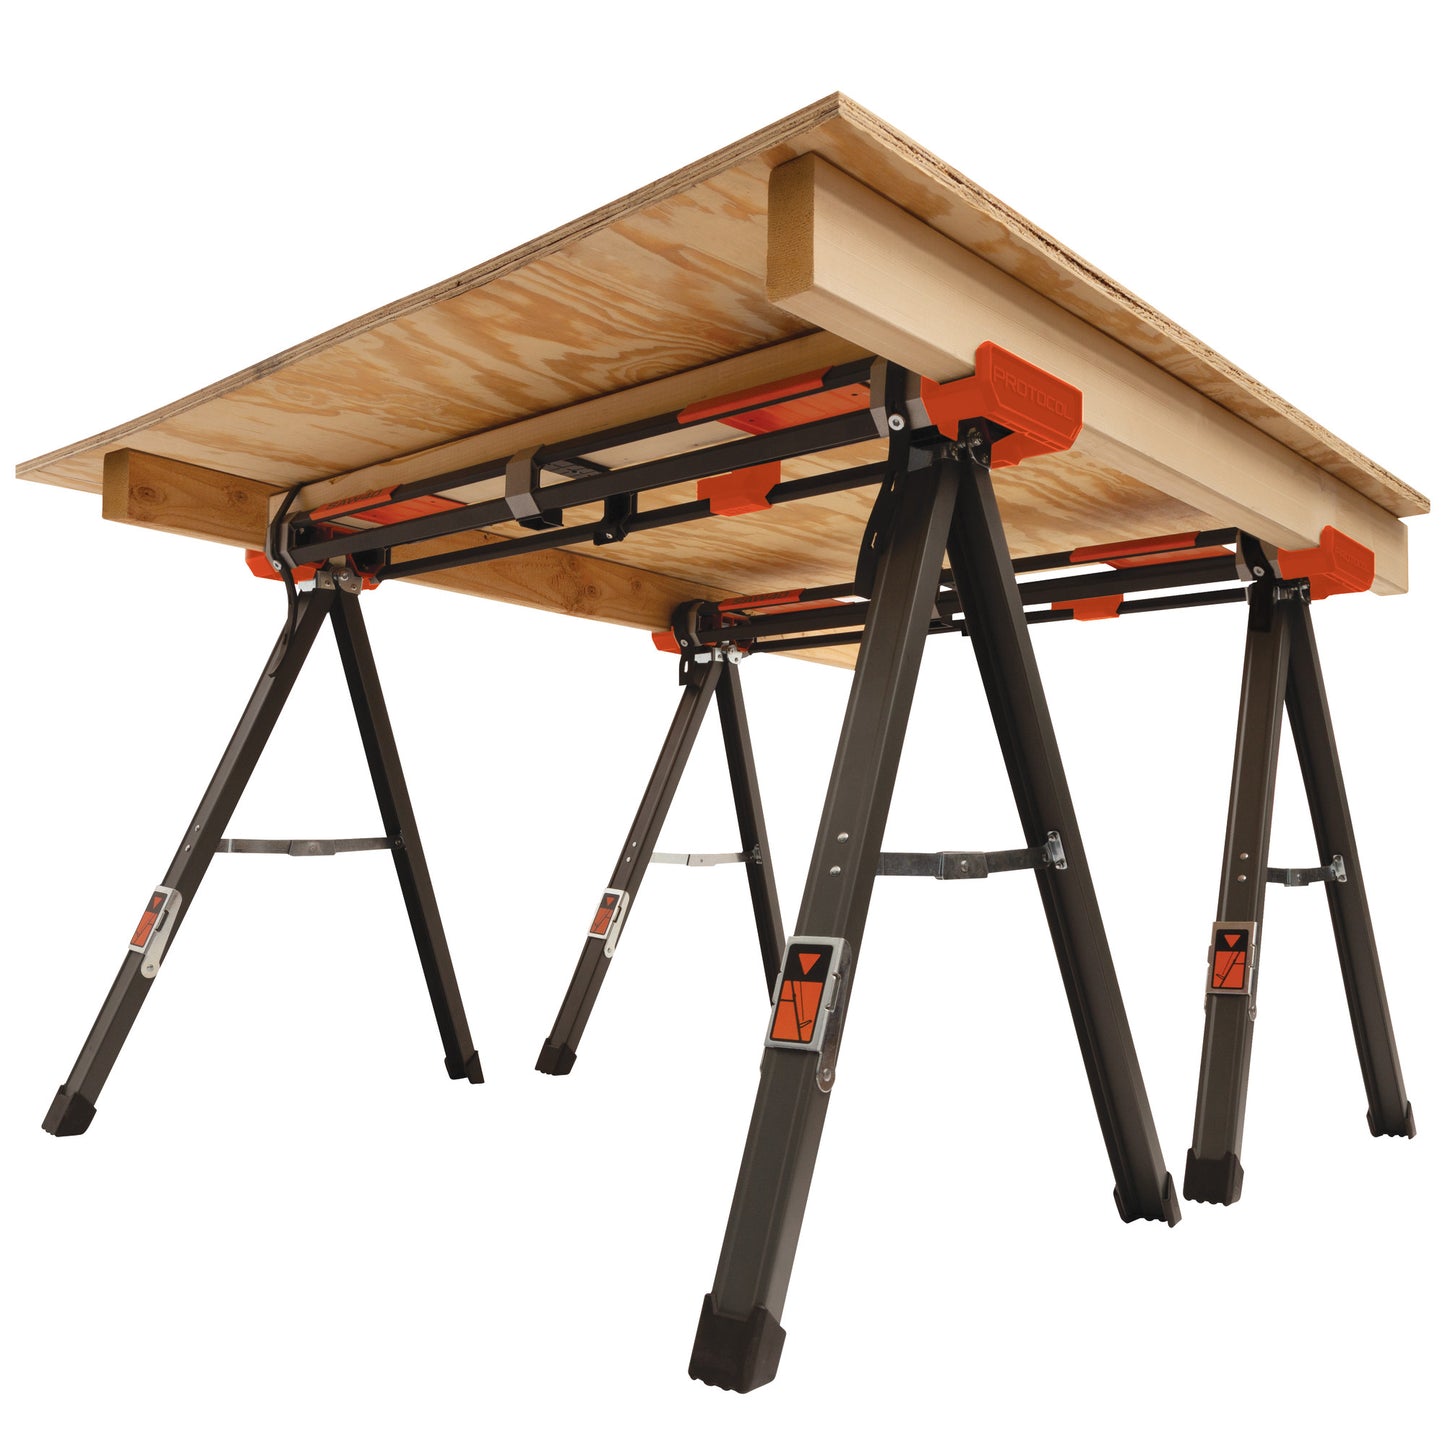 40 in. x 29 in. Lightweight Aluminum Sawhorse with 1000 lb. Capacity